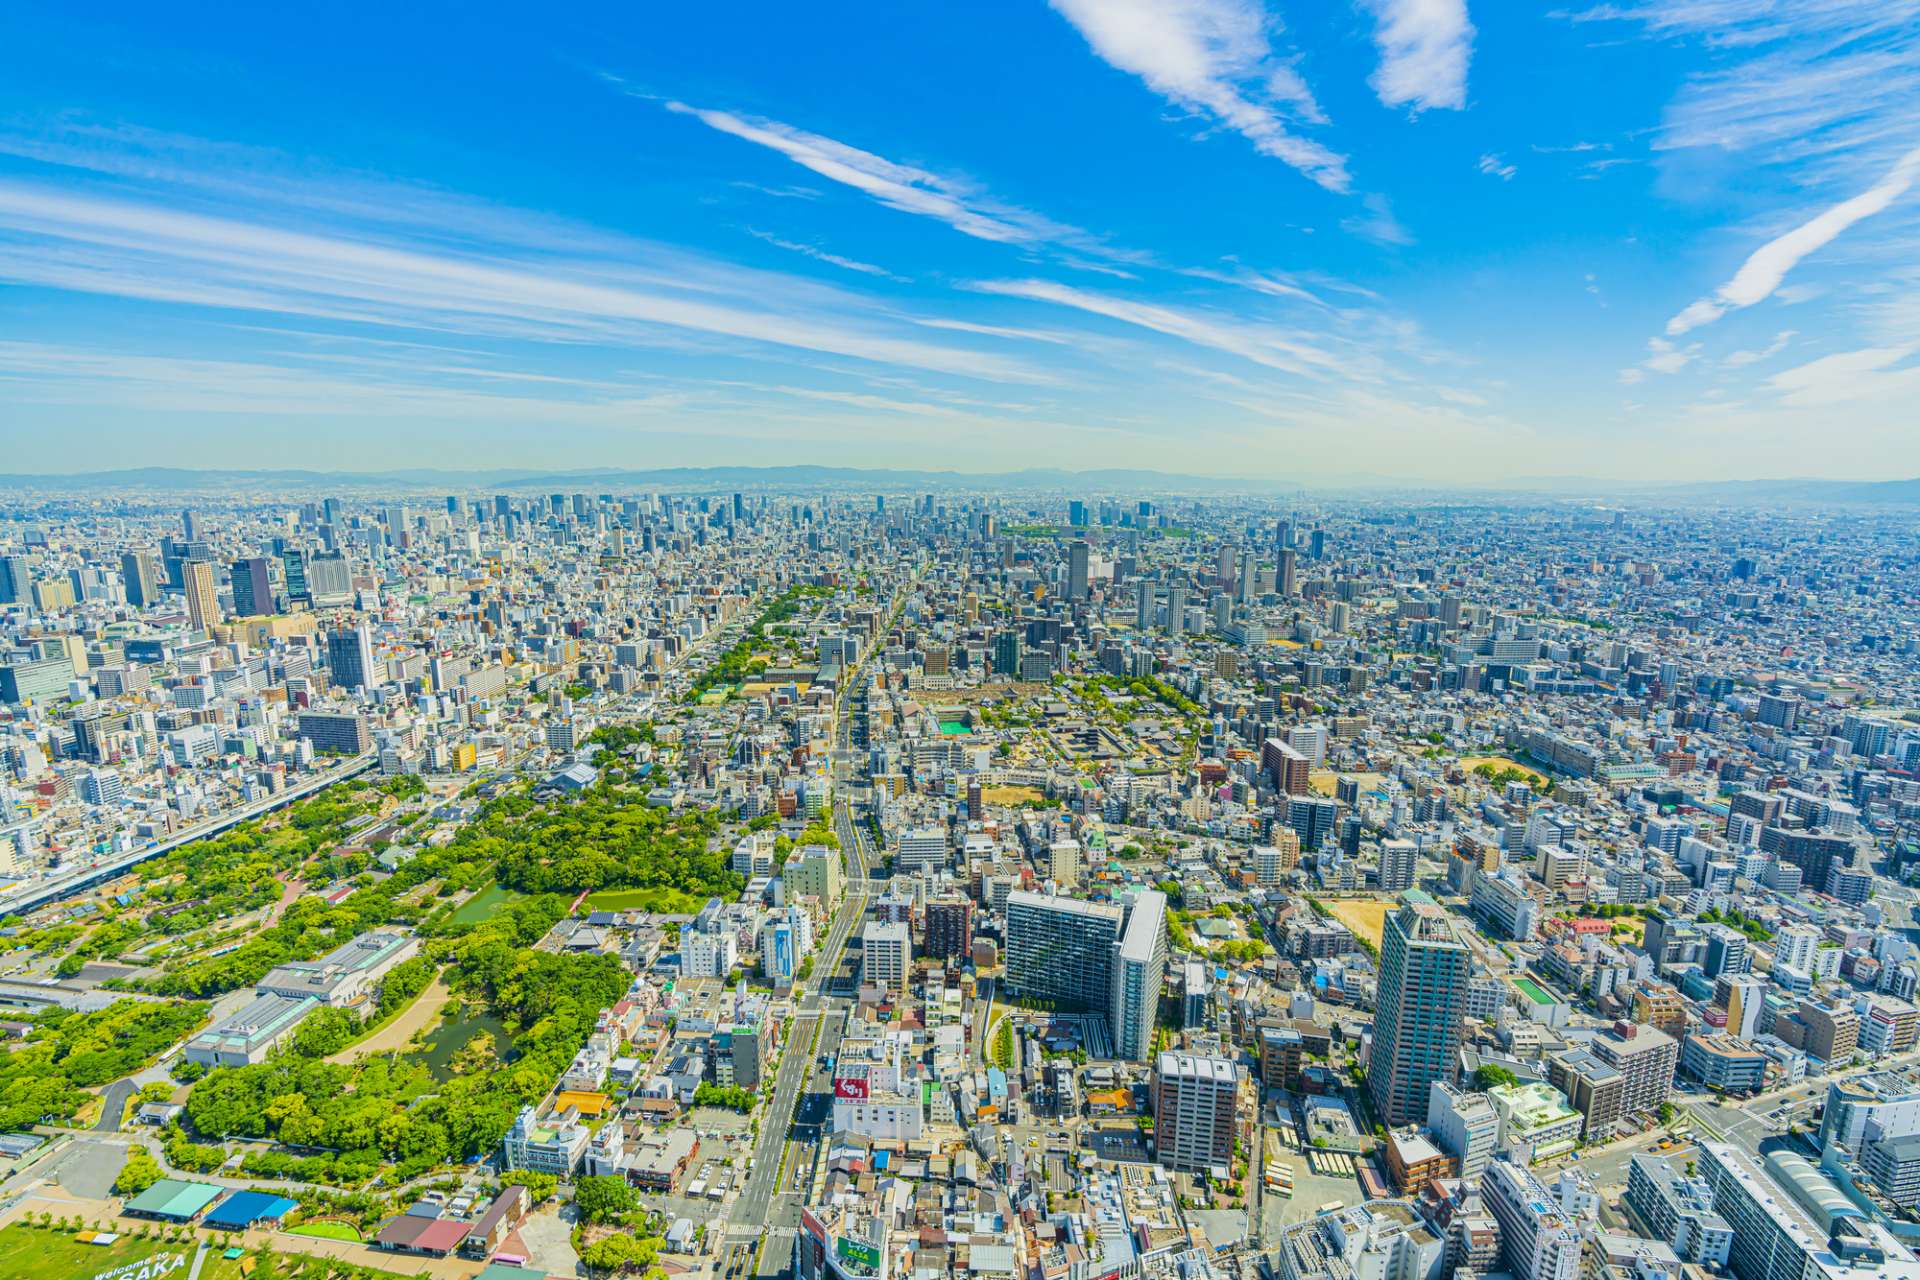 Osaka is the largest economic center in west Japan, and it is serving as a gateway to KANSAI including Kansai International Airport, Osaka International Airport, Osaka and Kobe Ports.